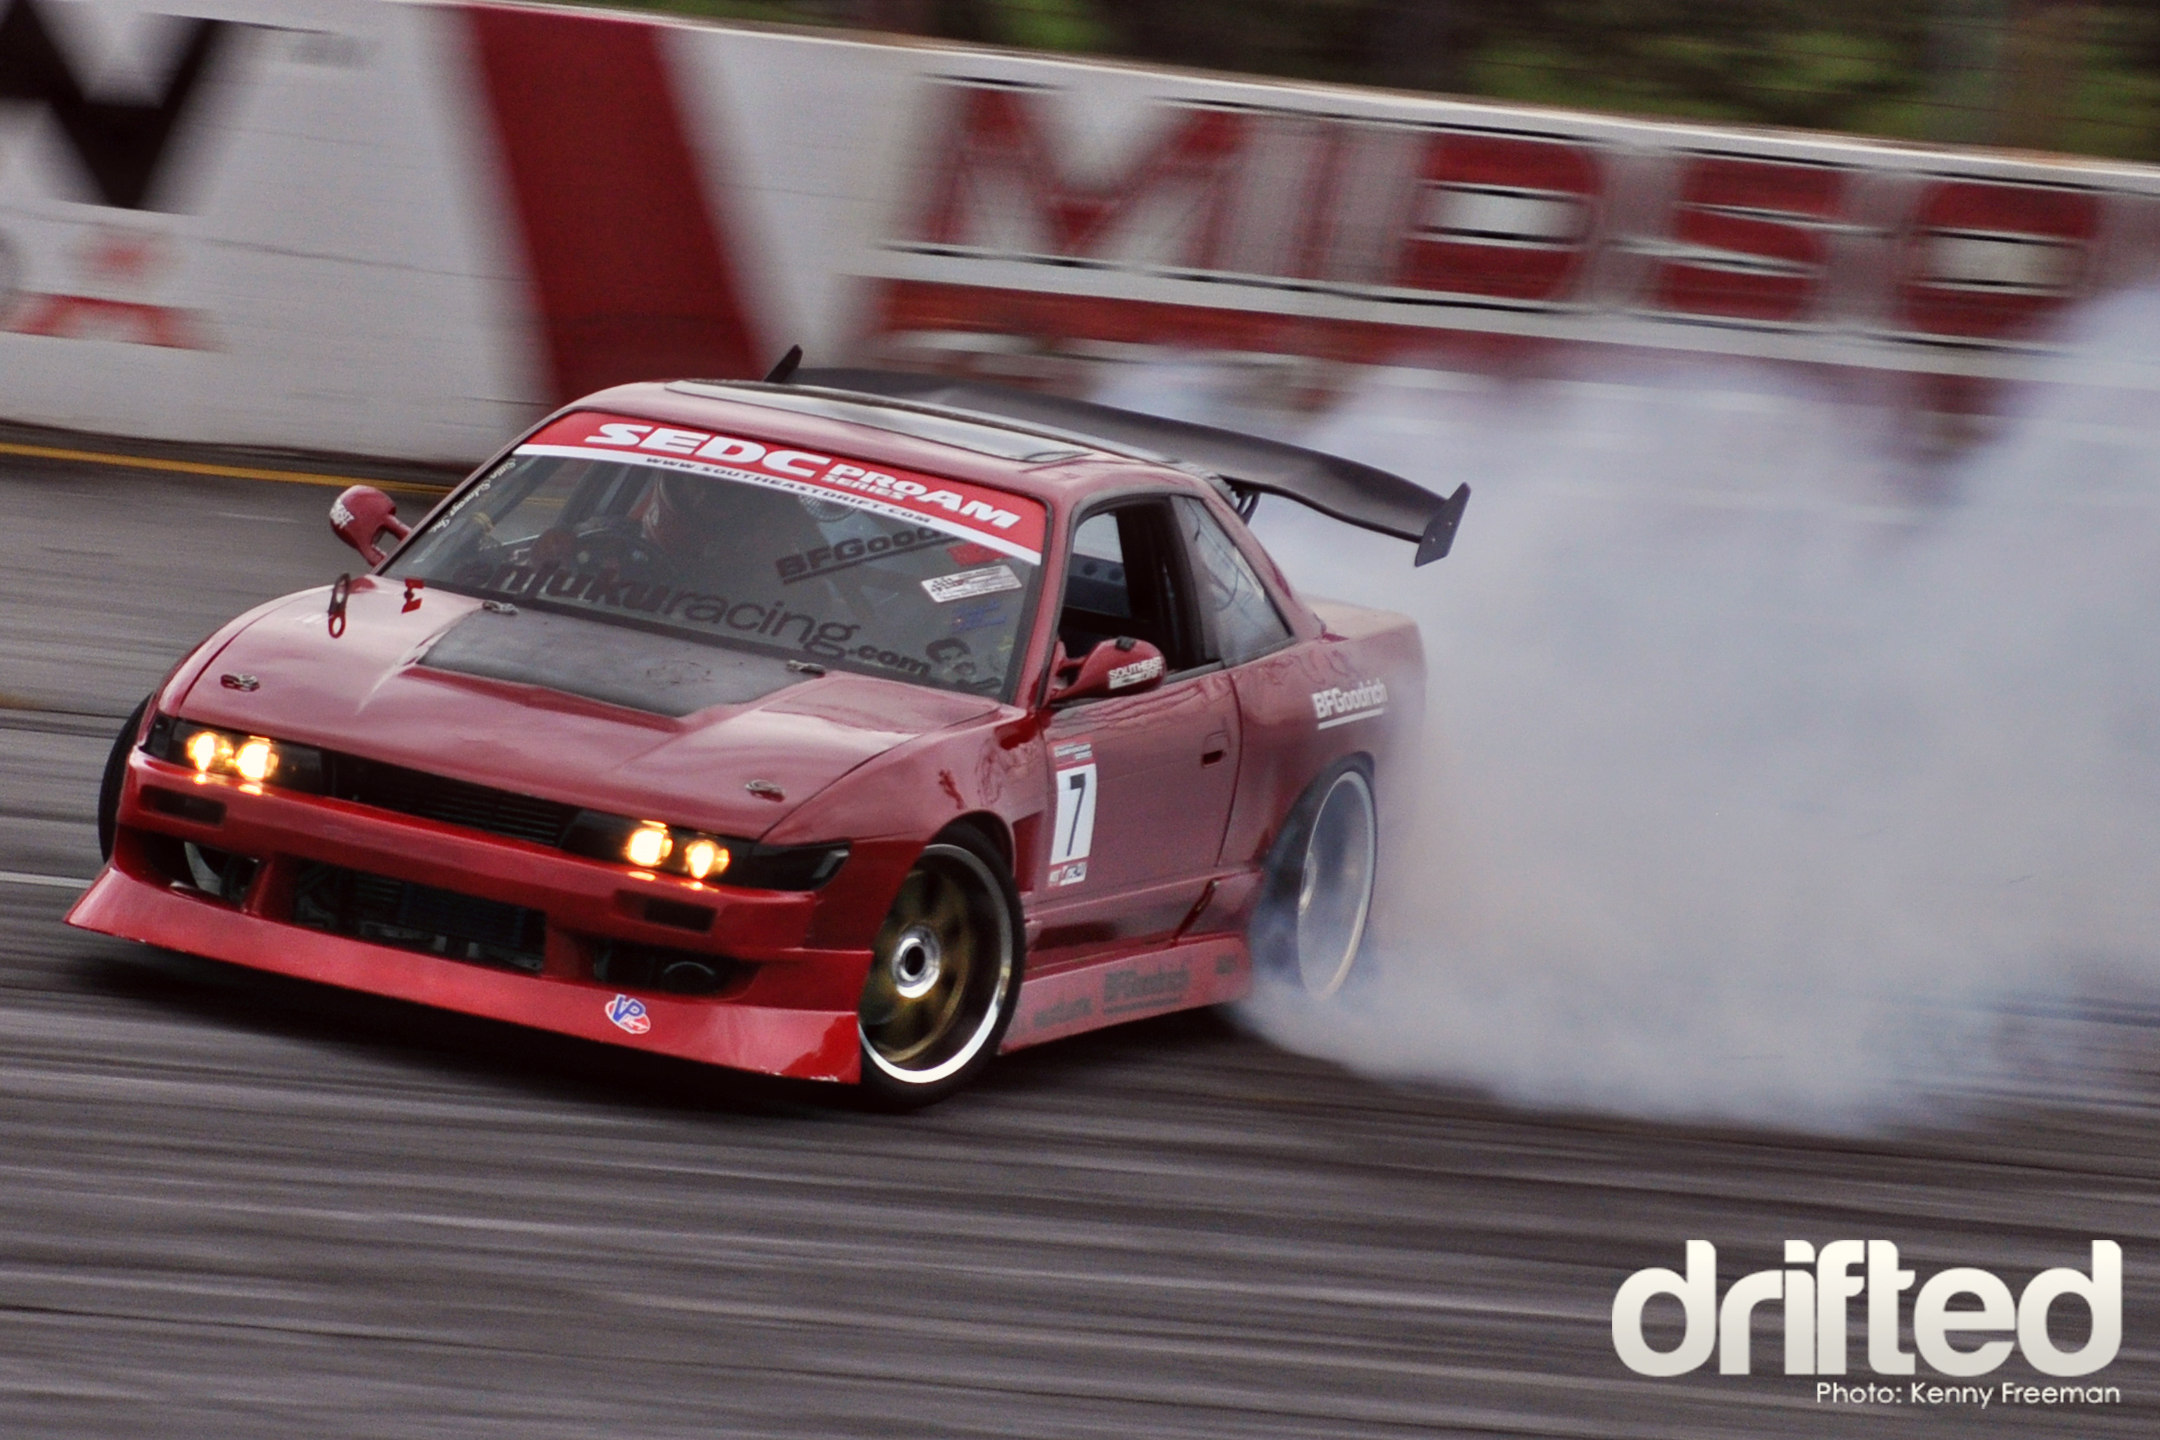 I learned how to drift a car from the pros